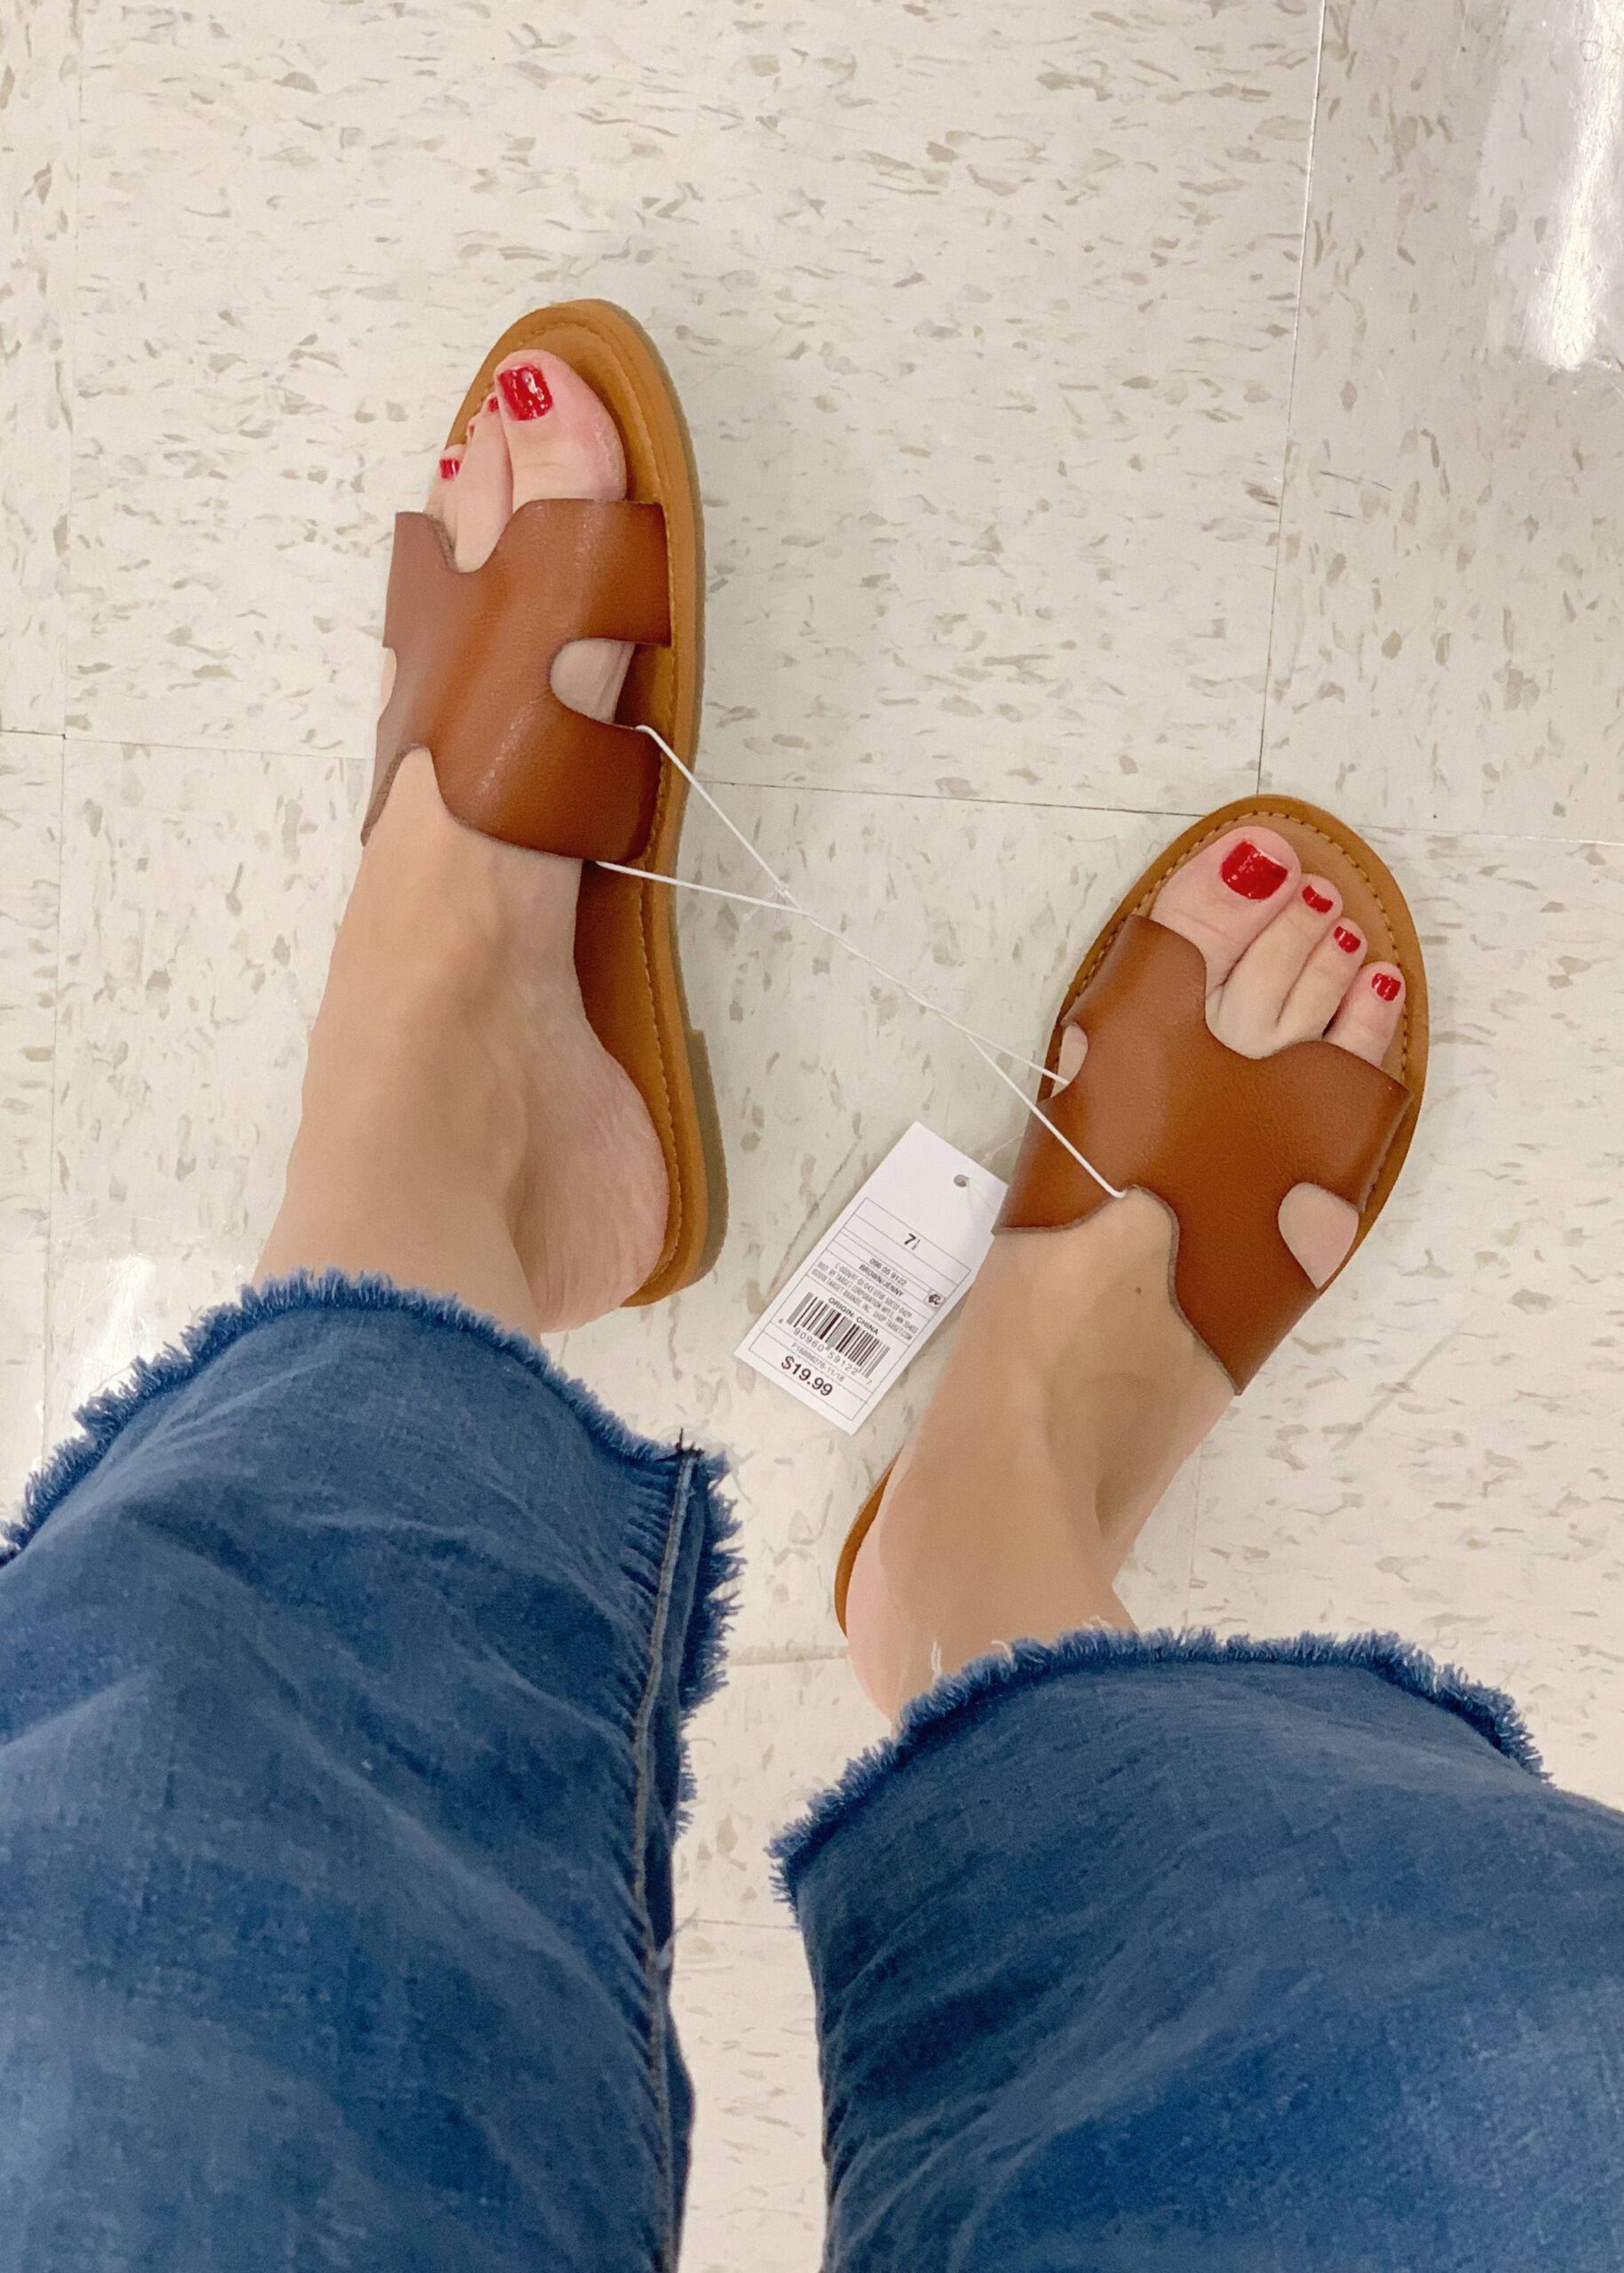 These sandals are a dupe of the Hermes slide and also the Steve Madden greek sandal that was so popular last year and has carried on into this spring too. They are only $19.99 and comes in gold, snake skin and black (although i’m not seeing black on…